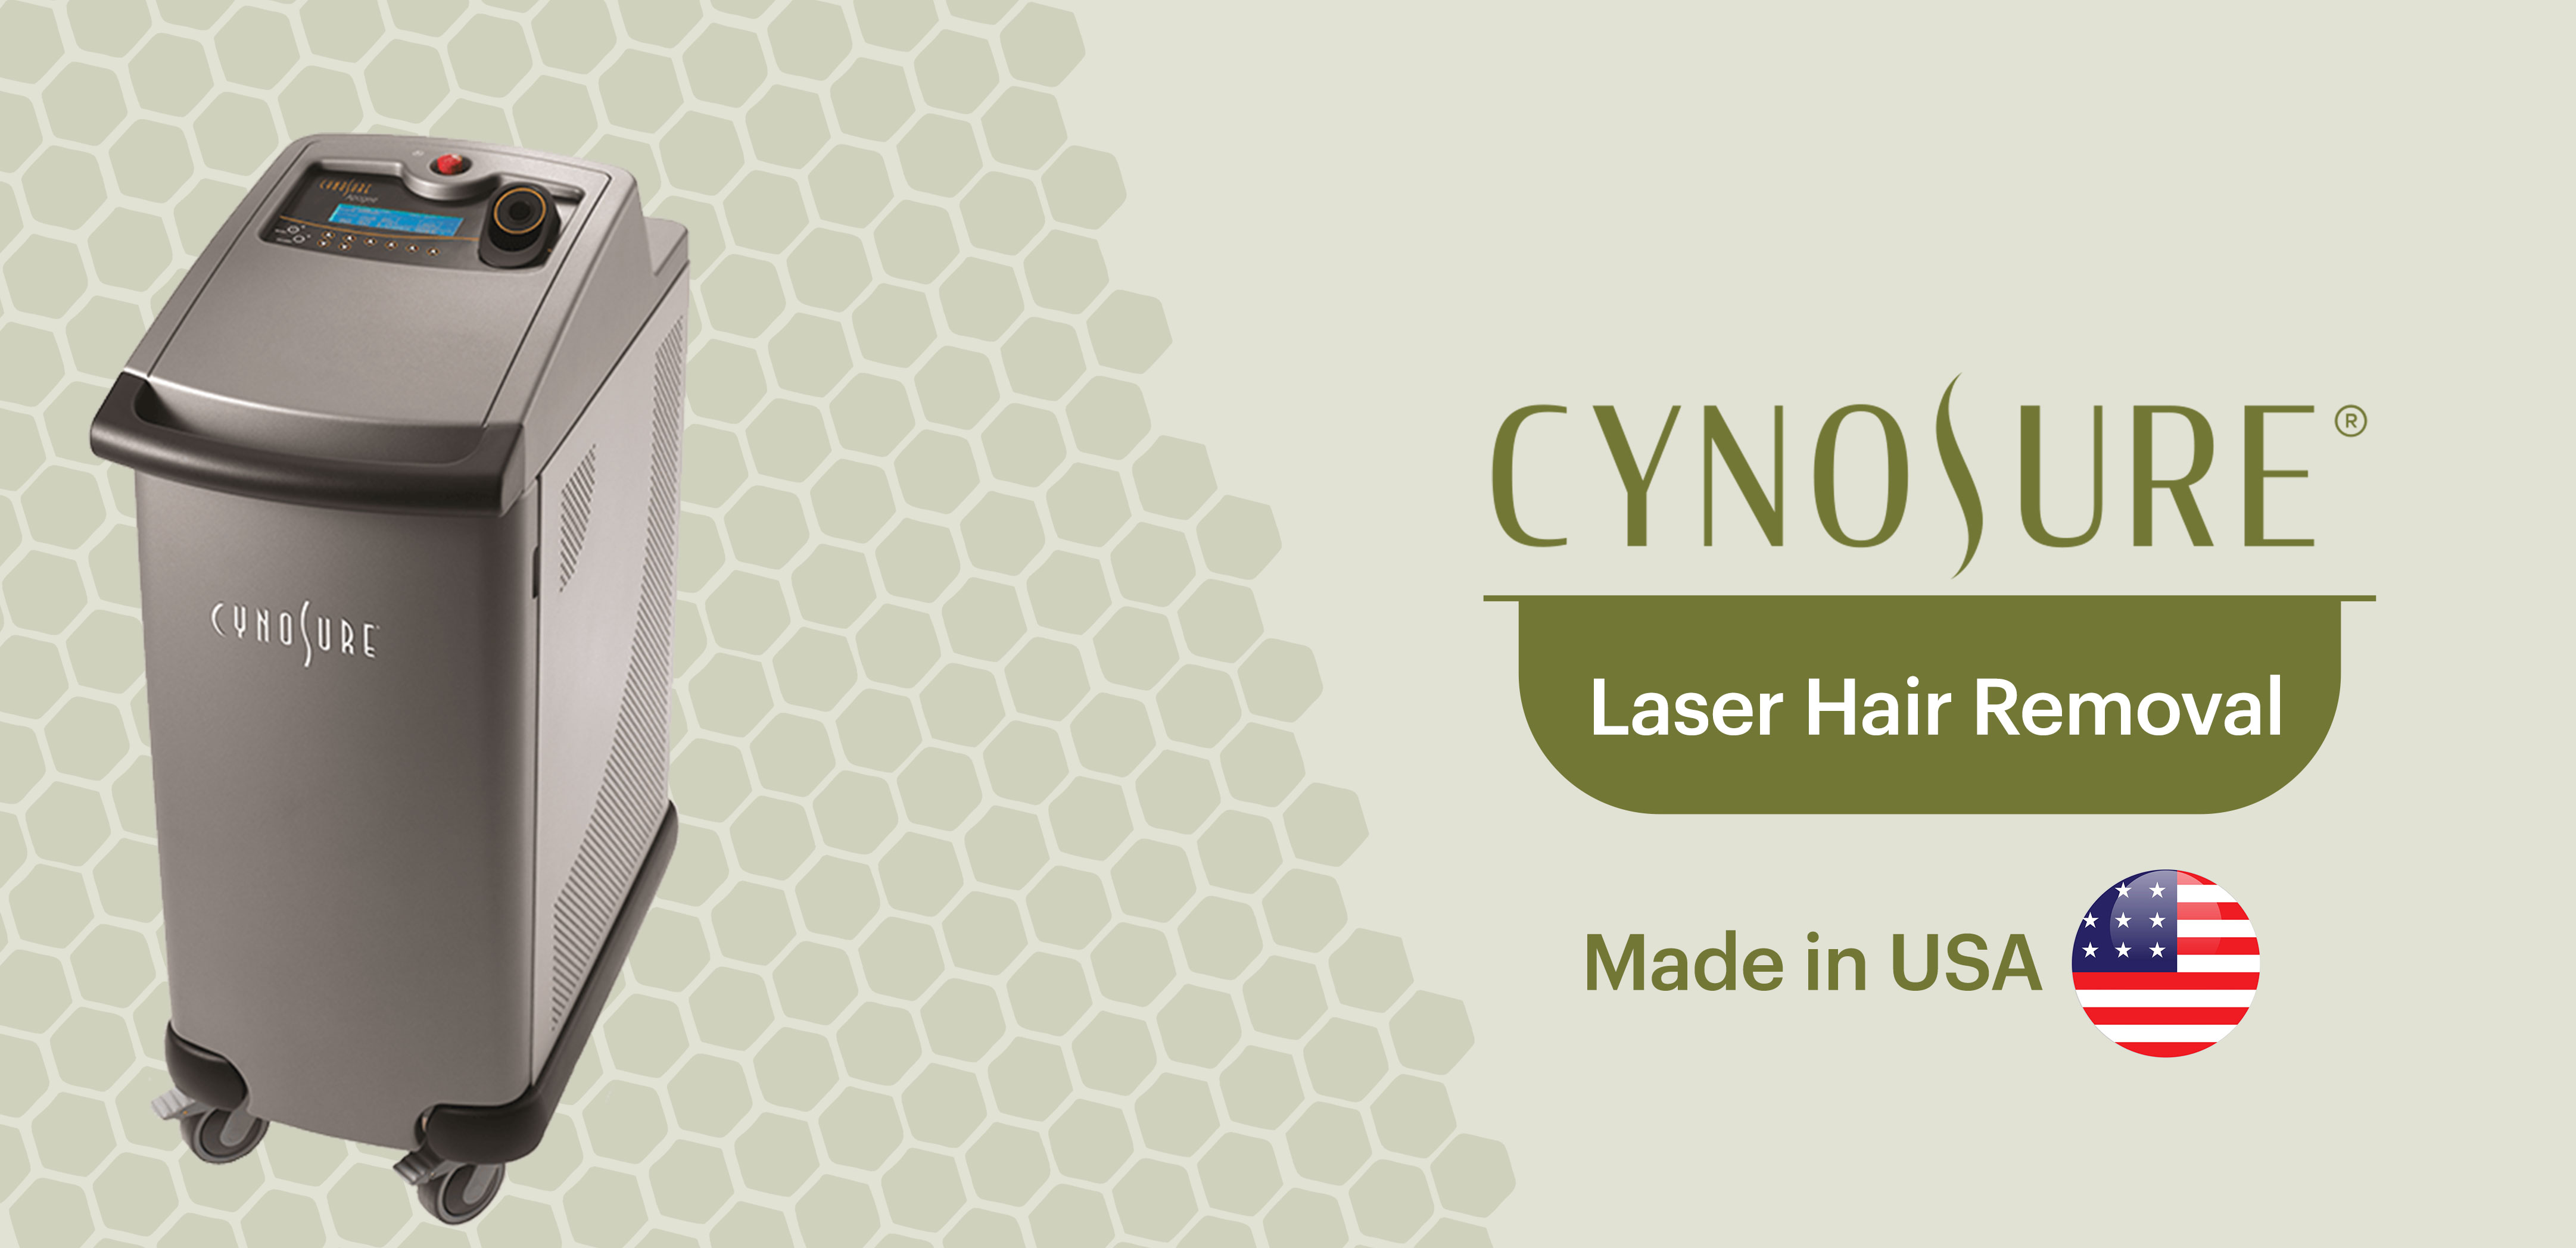 HAIR REMOVAL BY CYNOSURE